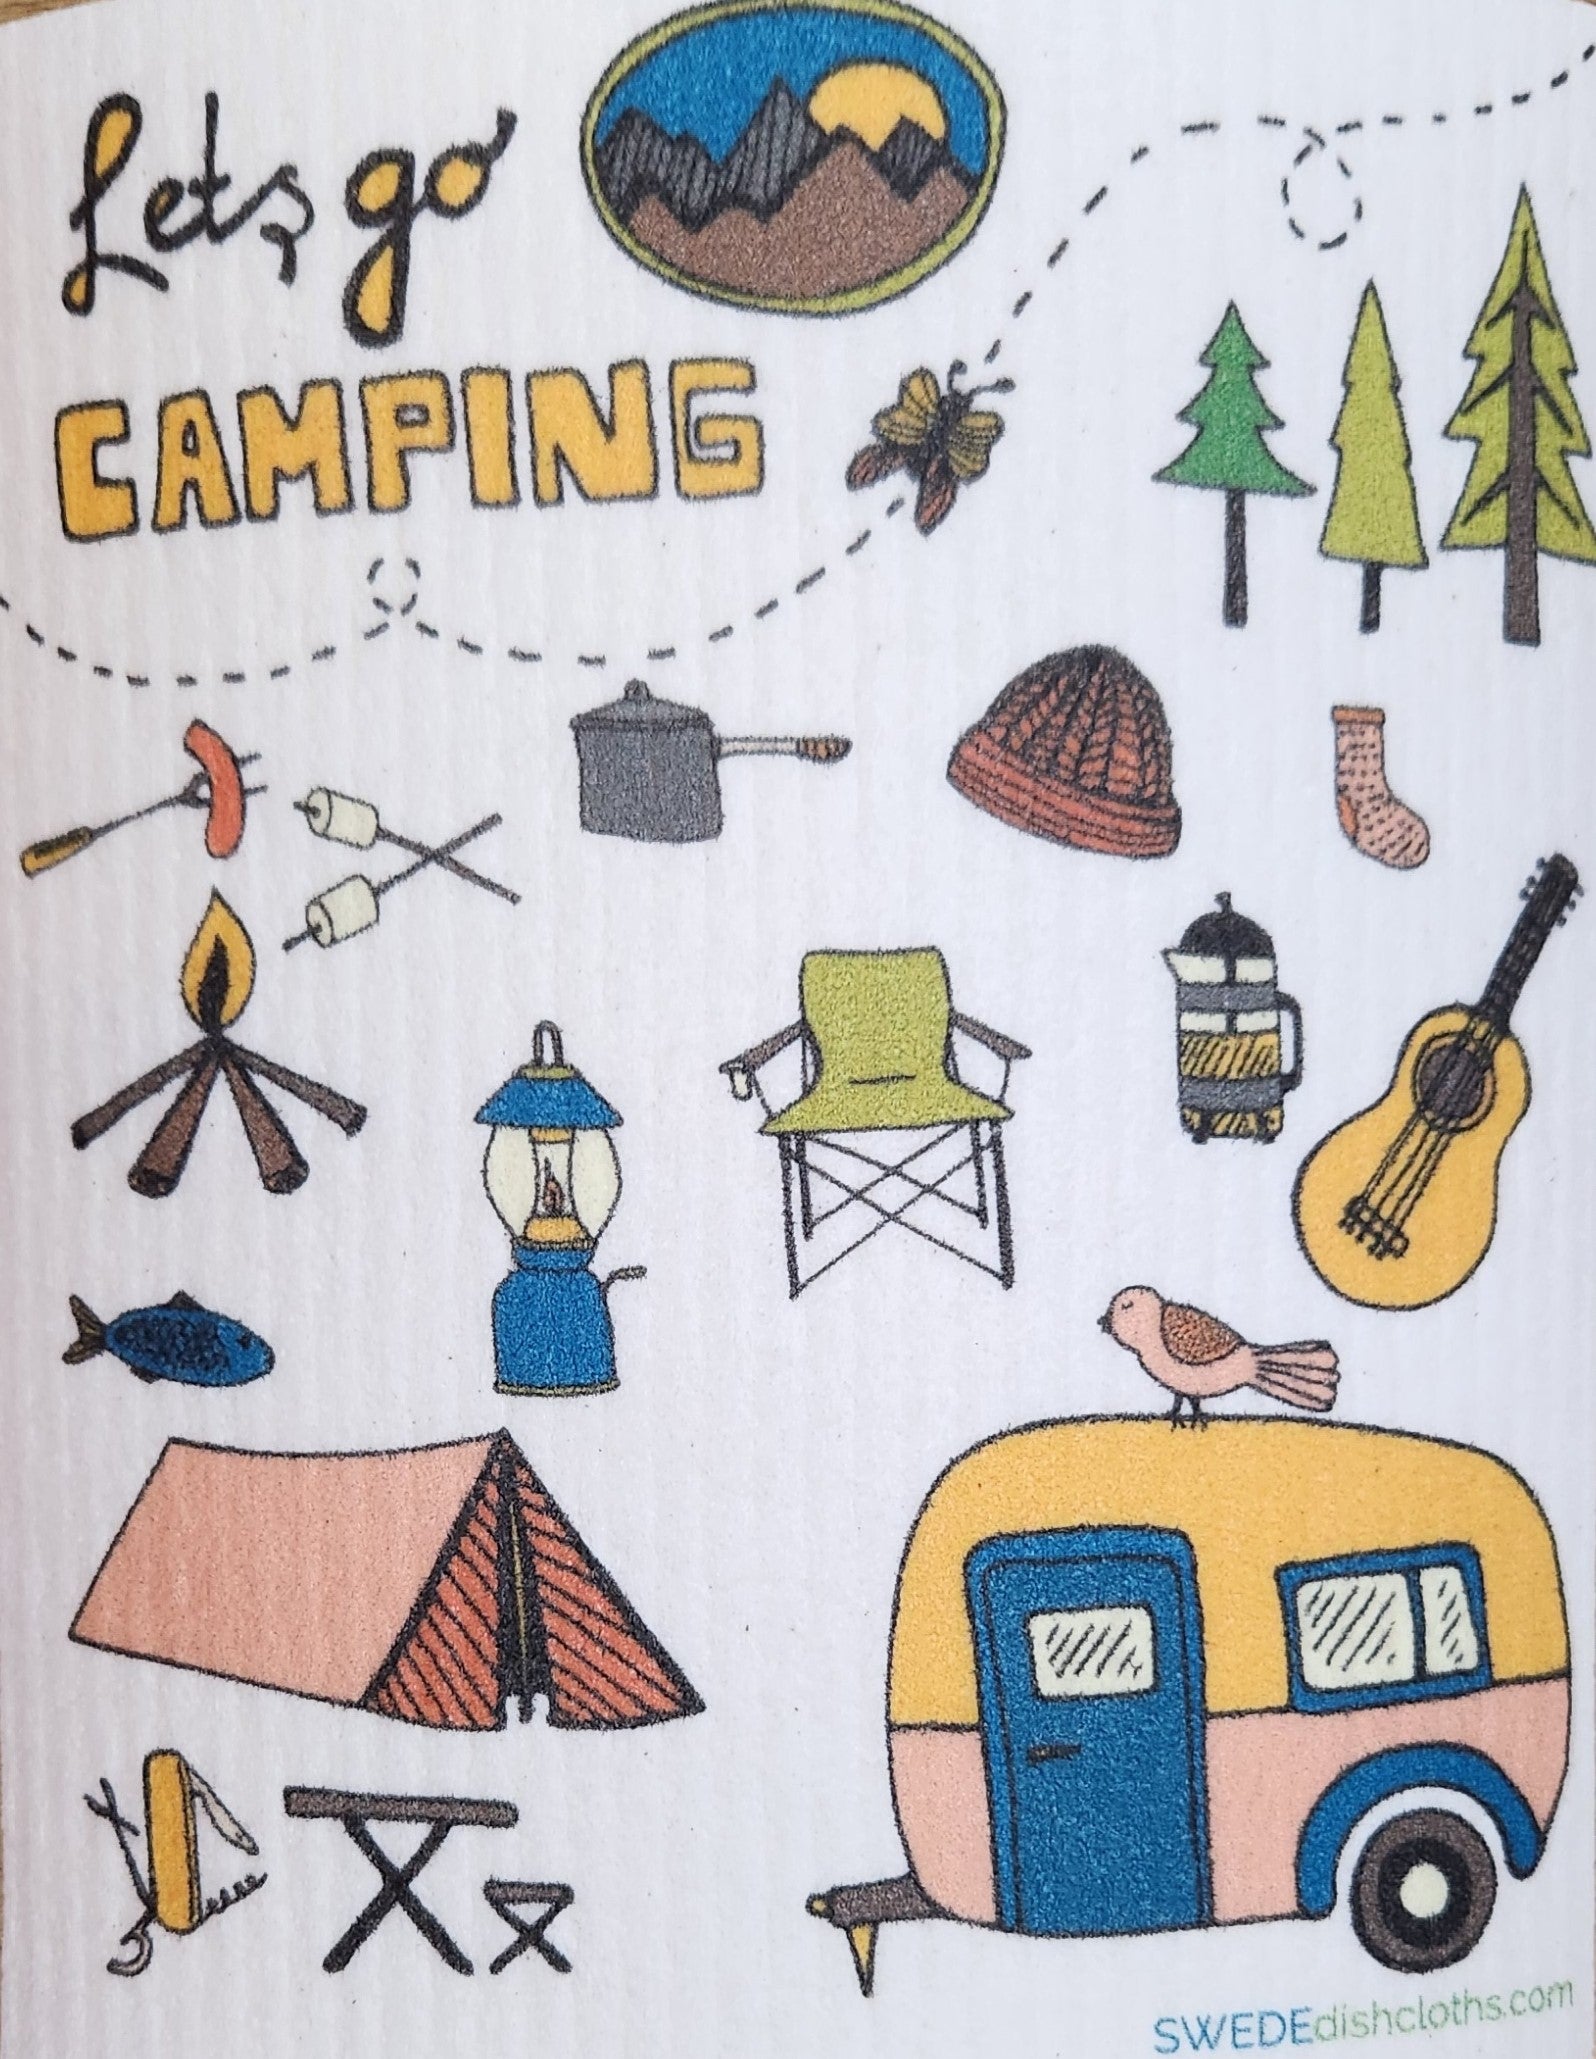 Swedish Dishcloth Let's Go Camping - Wiggle & Ding